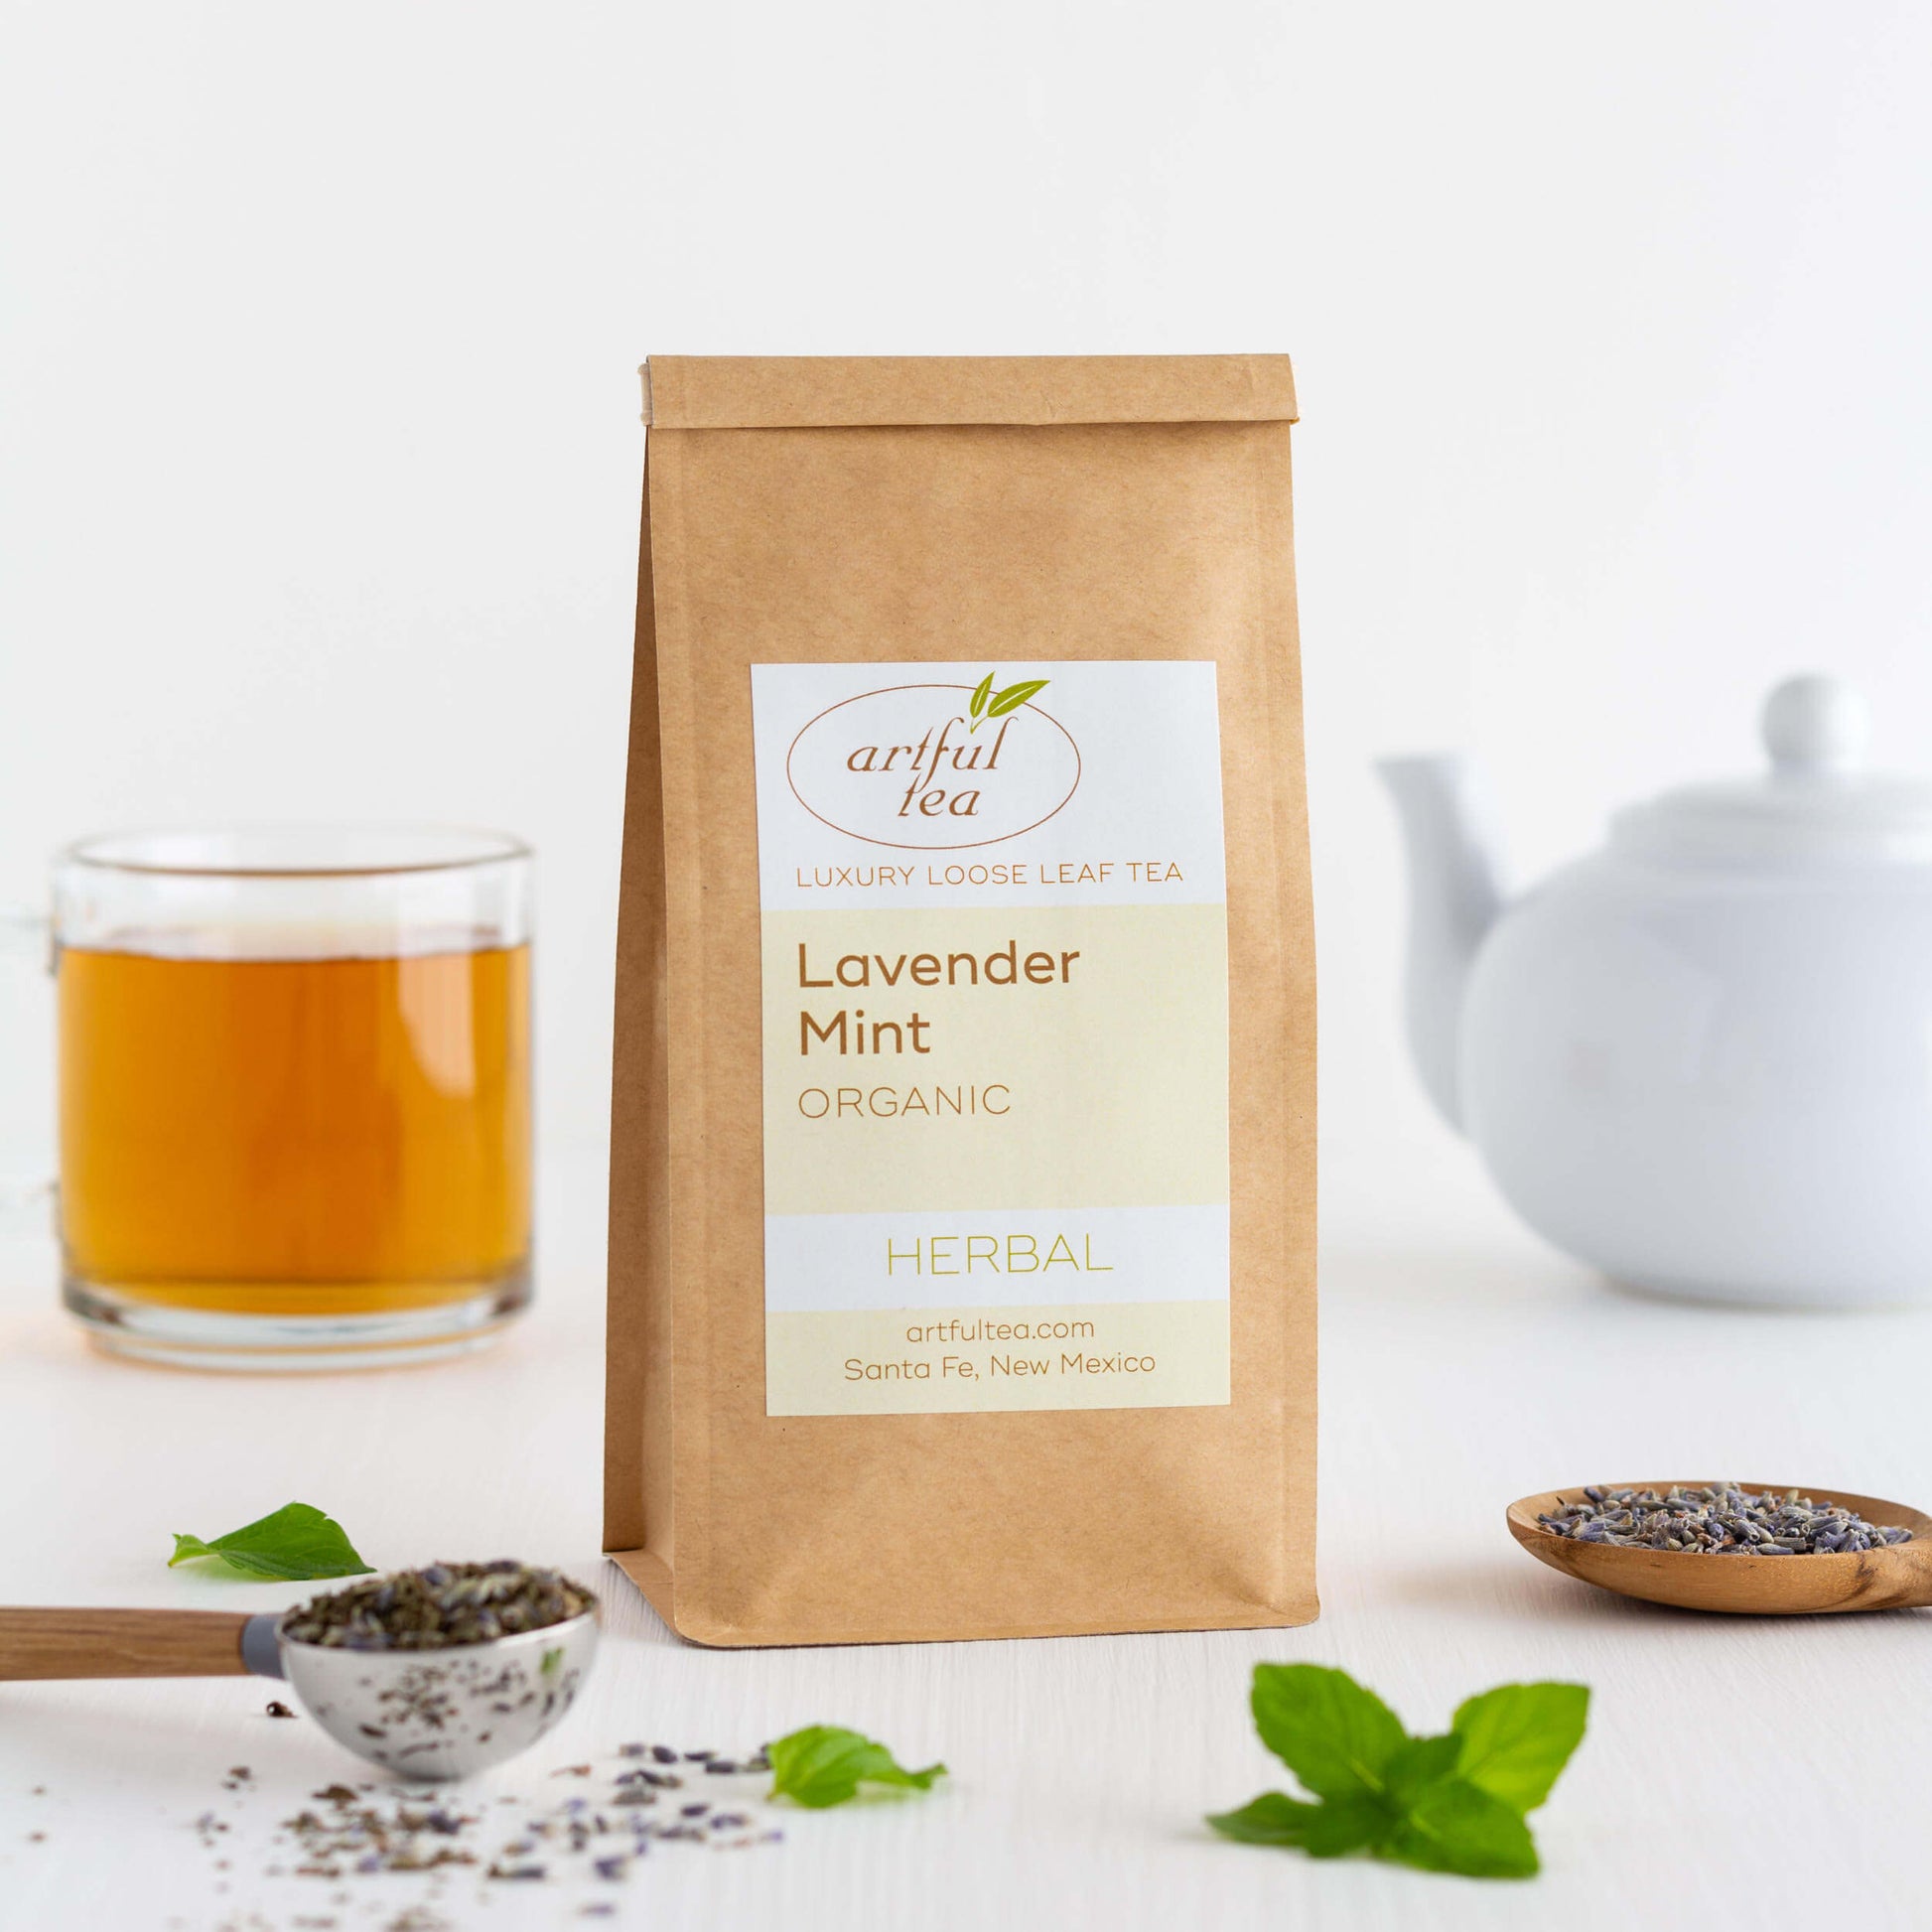 Lavender Mint Organic Herbal Tea shown packaged in a kraft bag with a scoop of tea leaves and some fresh mint leaves in the foreground. A glass mug of brewed tea and a white teapot are in the background